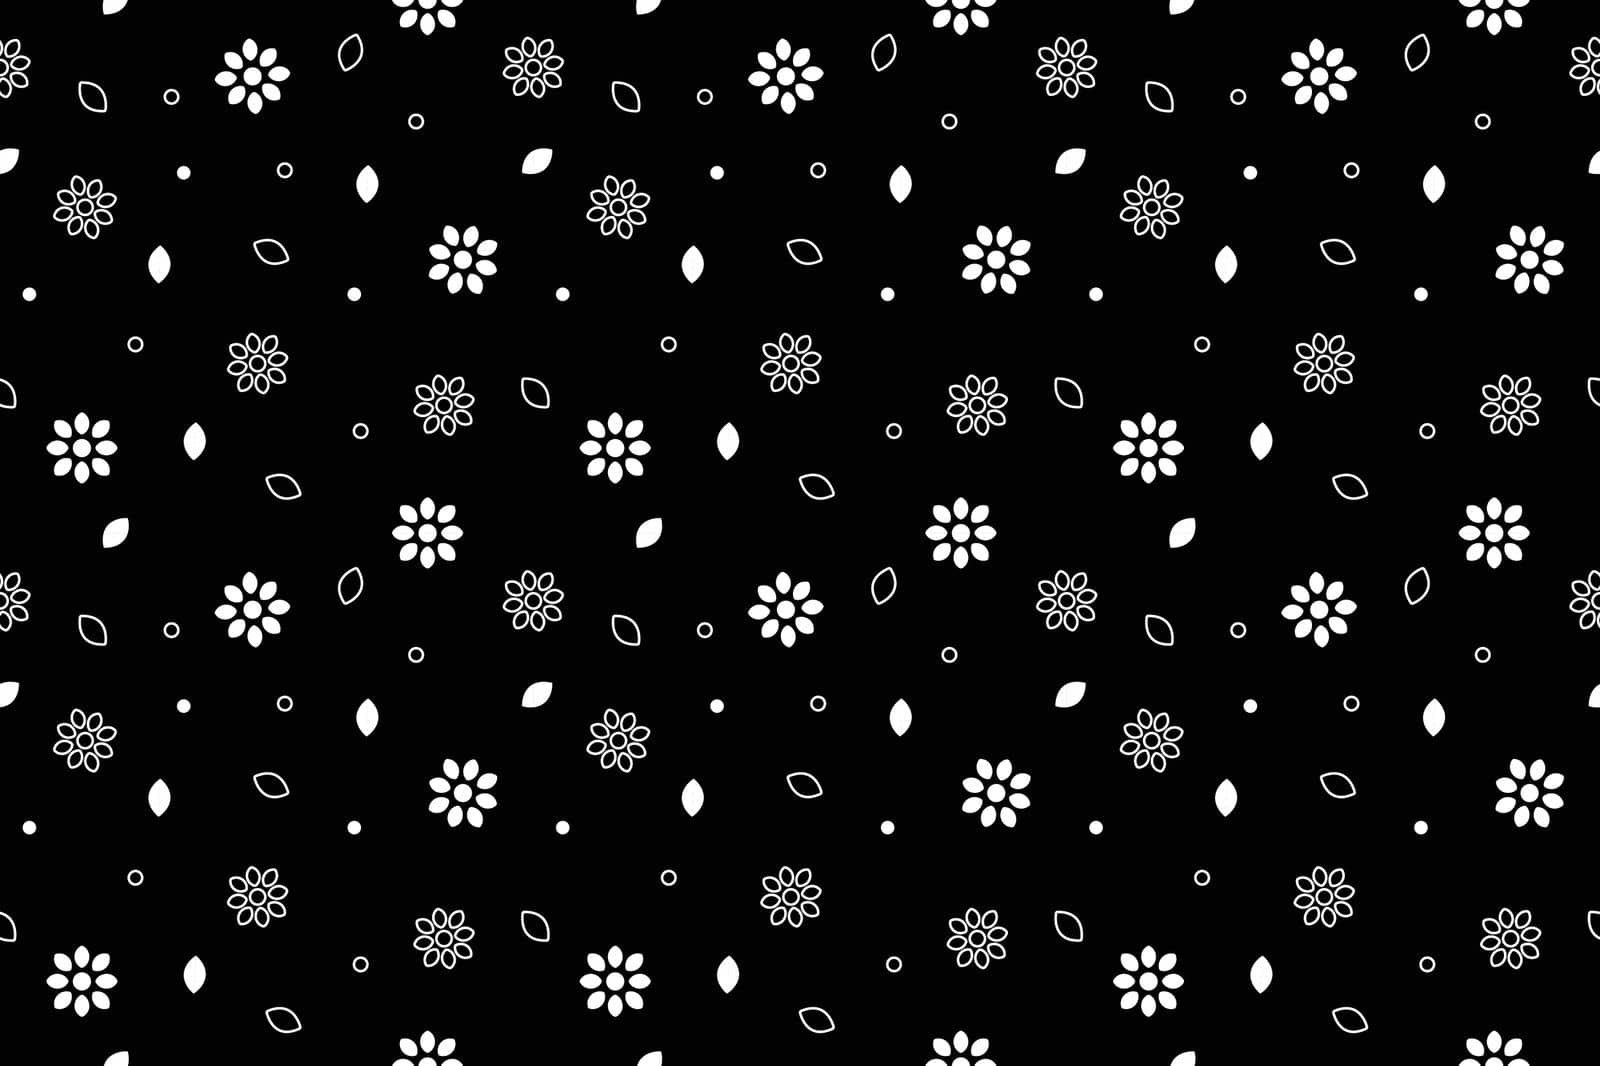 Raster monochrome seamless pattern with small scattered tiny shapes. Simple minimal background. Black and white geometric wallpaper. Dark repeat design for decor, print. Vector illustration